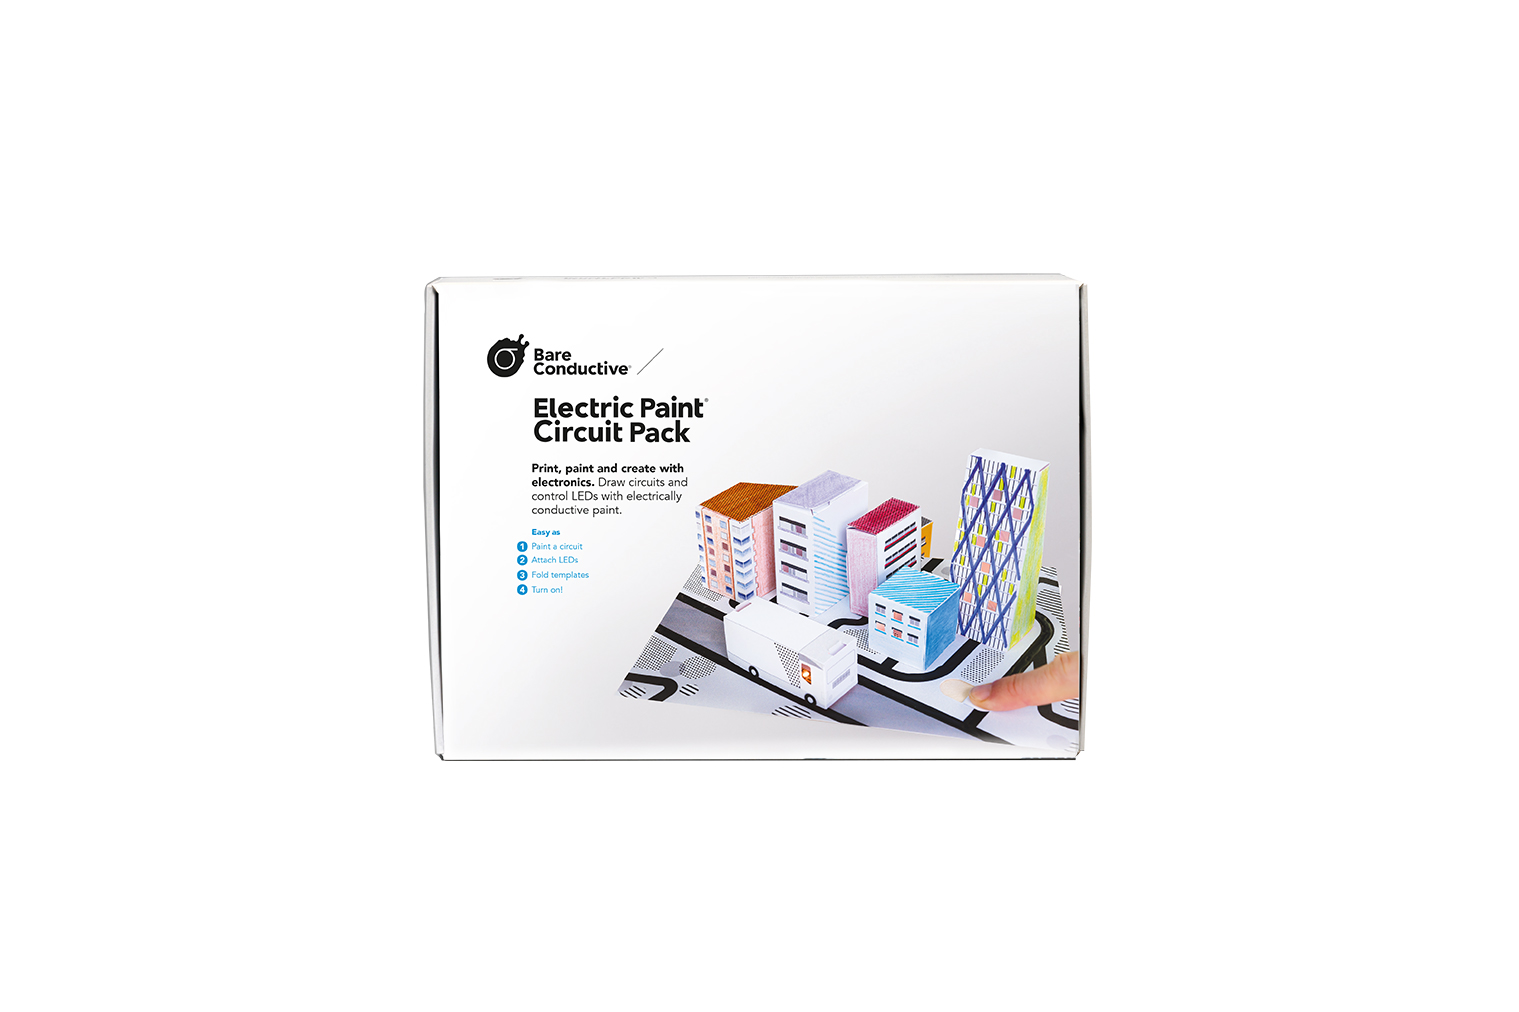 Bare geleidende Electric Paint Circuit Pack